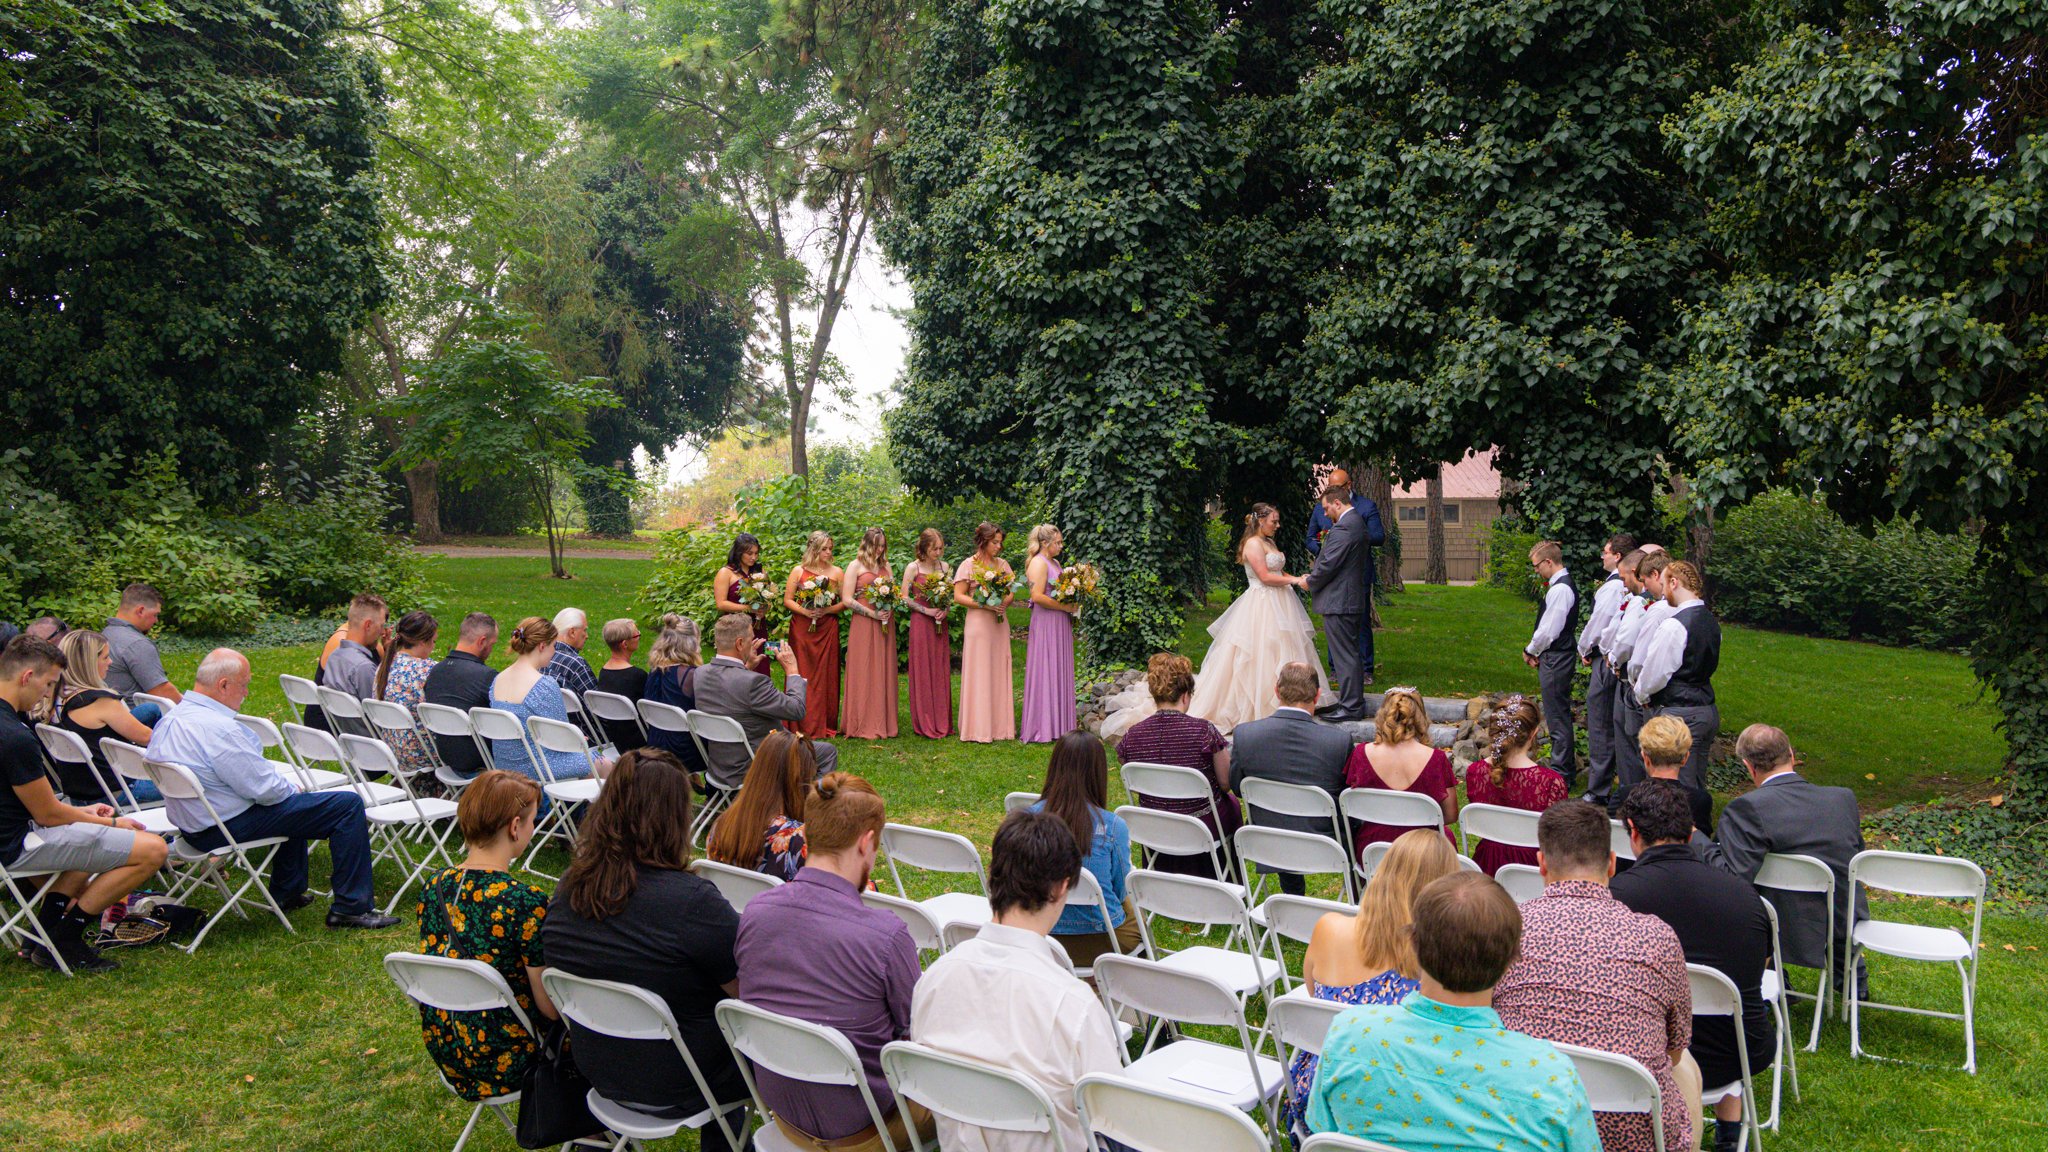 Weddings in the Enchanted Forest